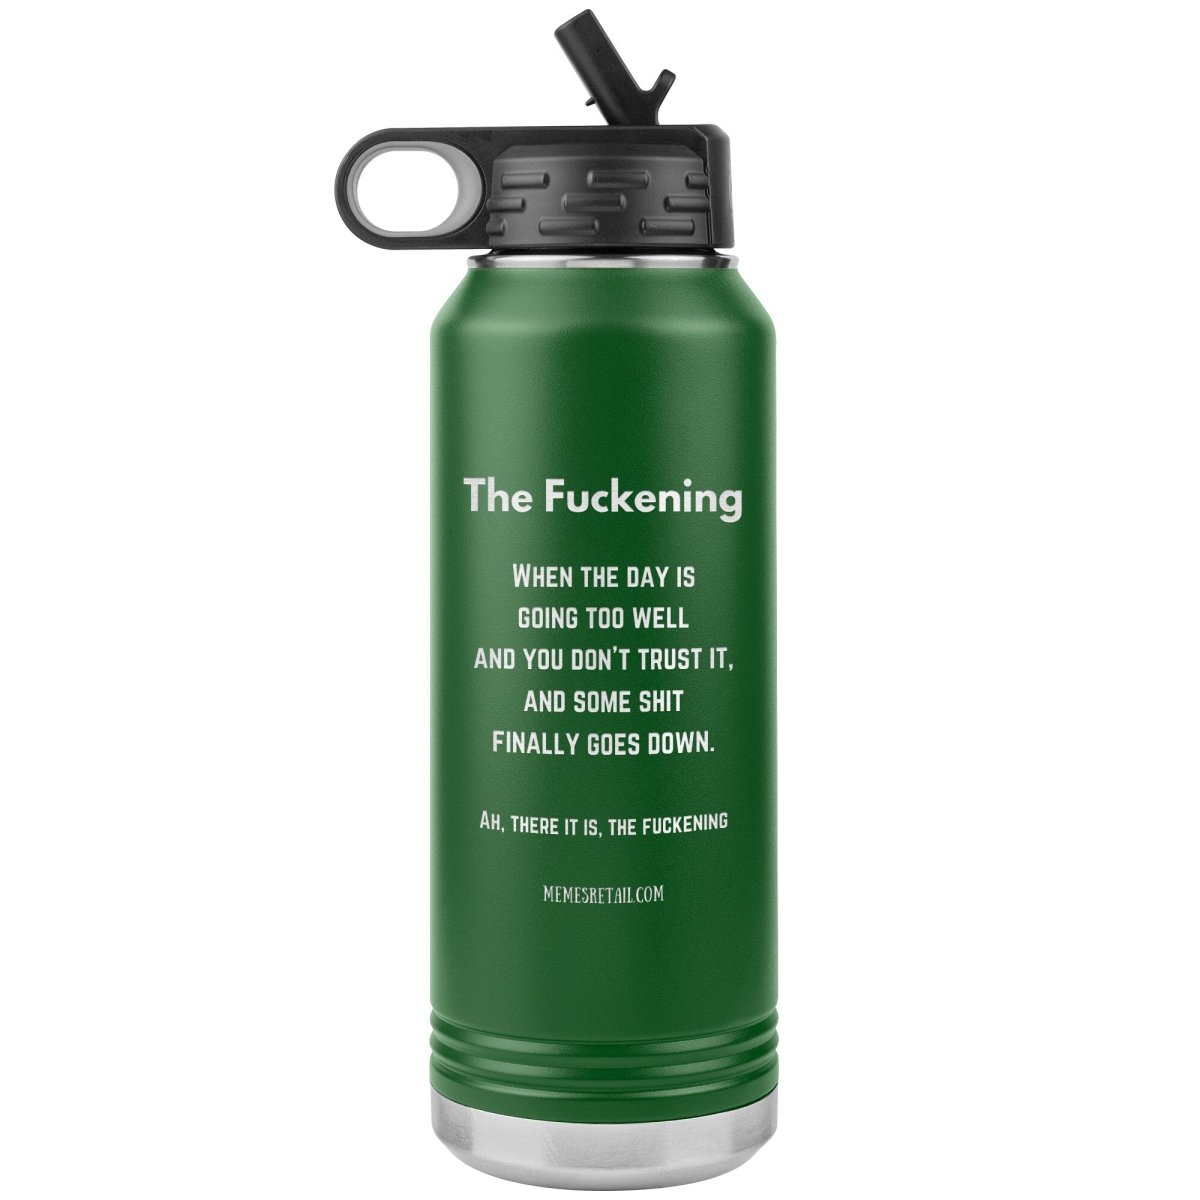 The Fuckening, When you don't trust the day. 32 oz Water Bottle, Green - MemesRetail.com